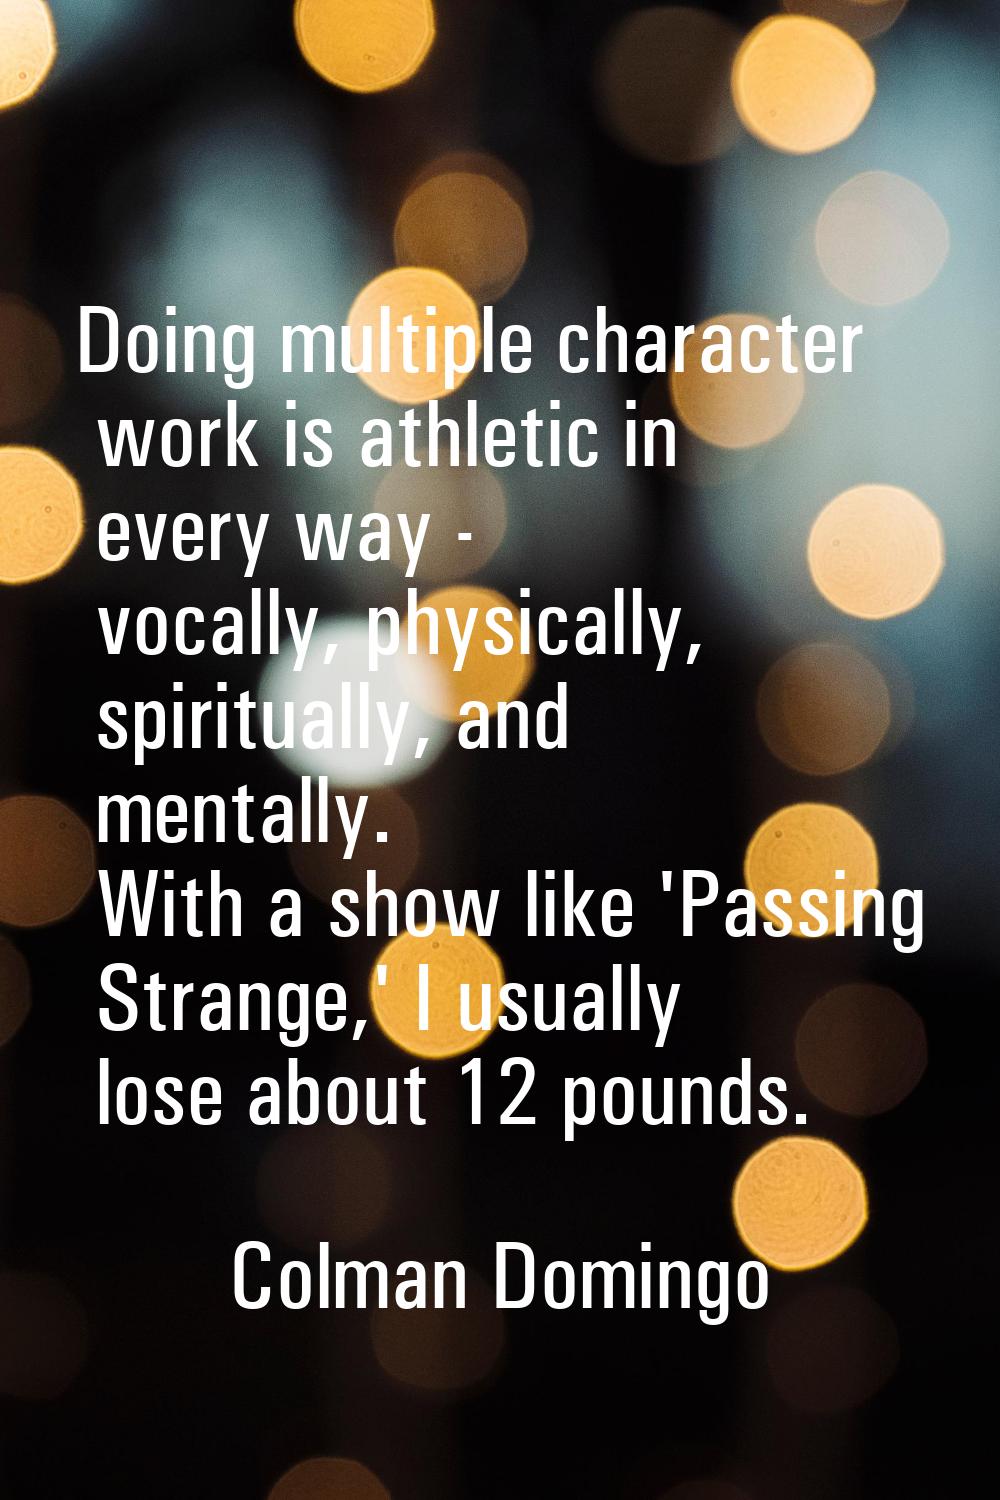 Doing multiple character work is athletic in every way - vocally, physically, spiritually, and ment